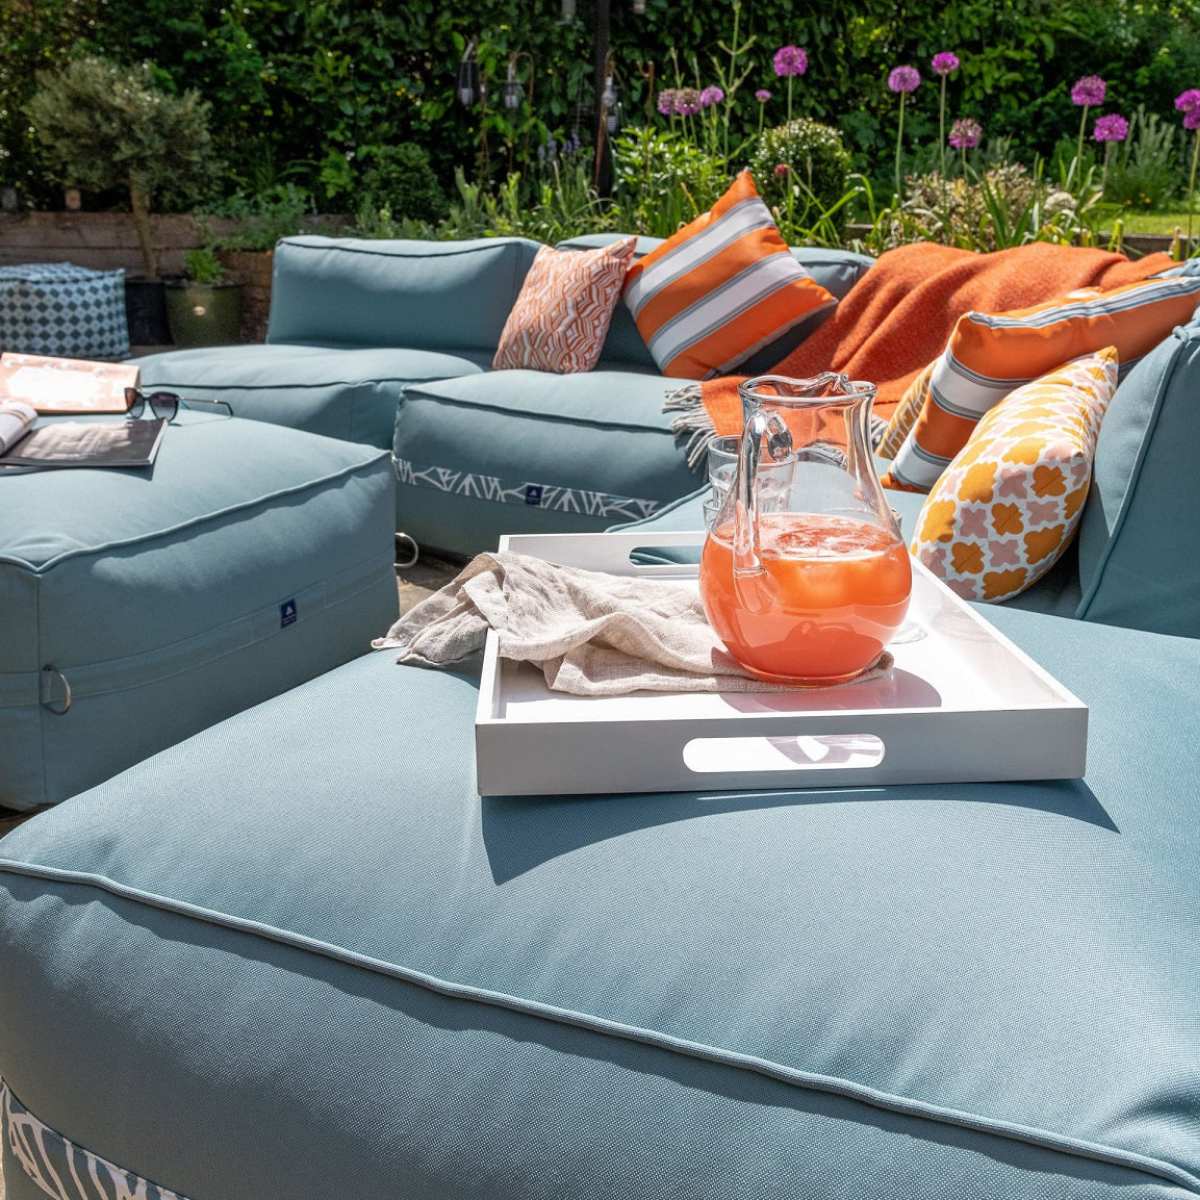 How To Measure For Outdoor Cushions